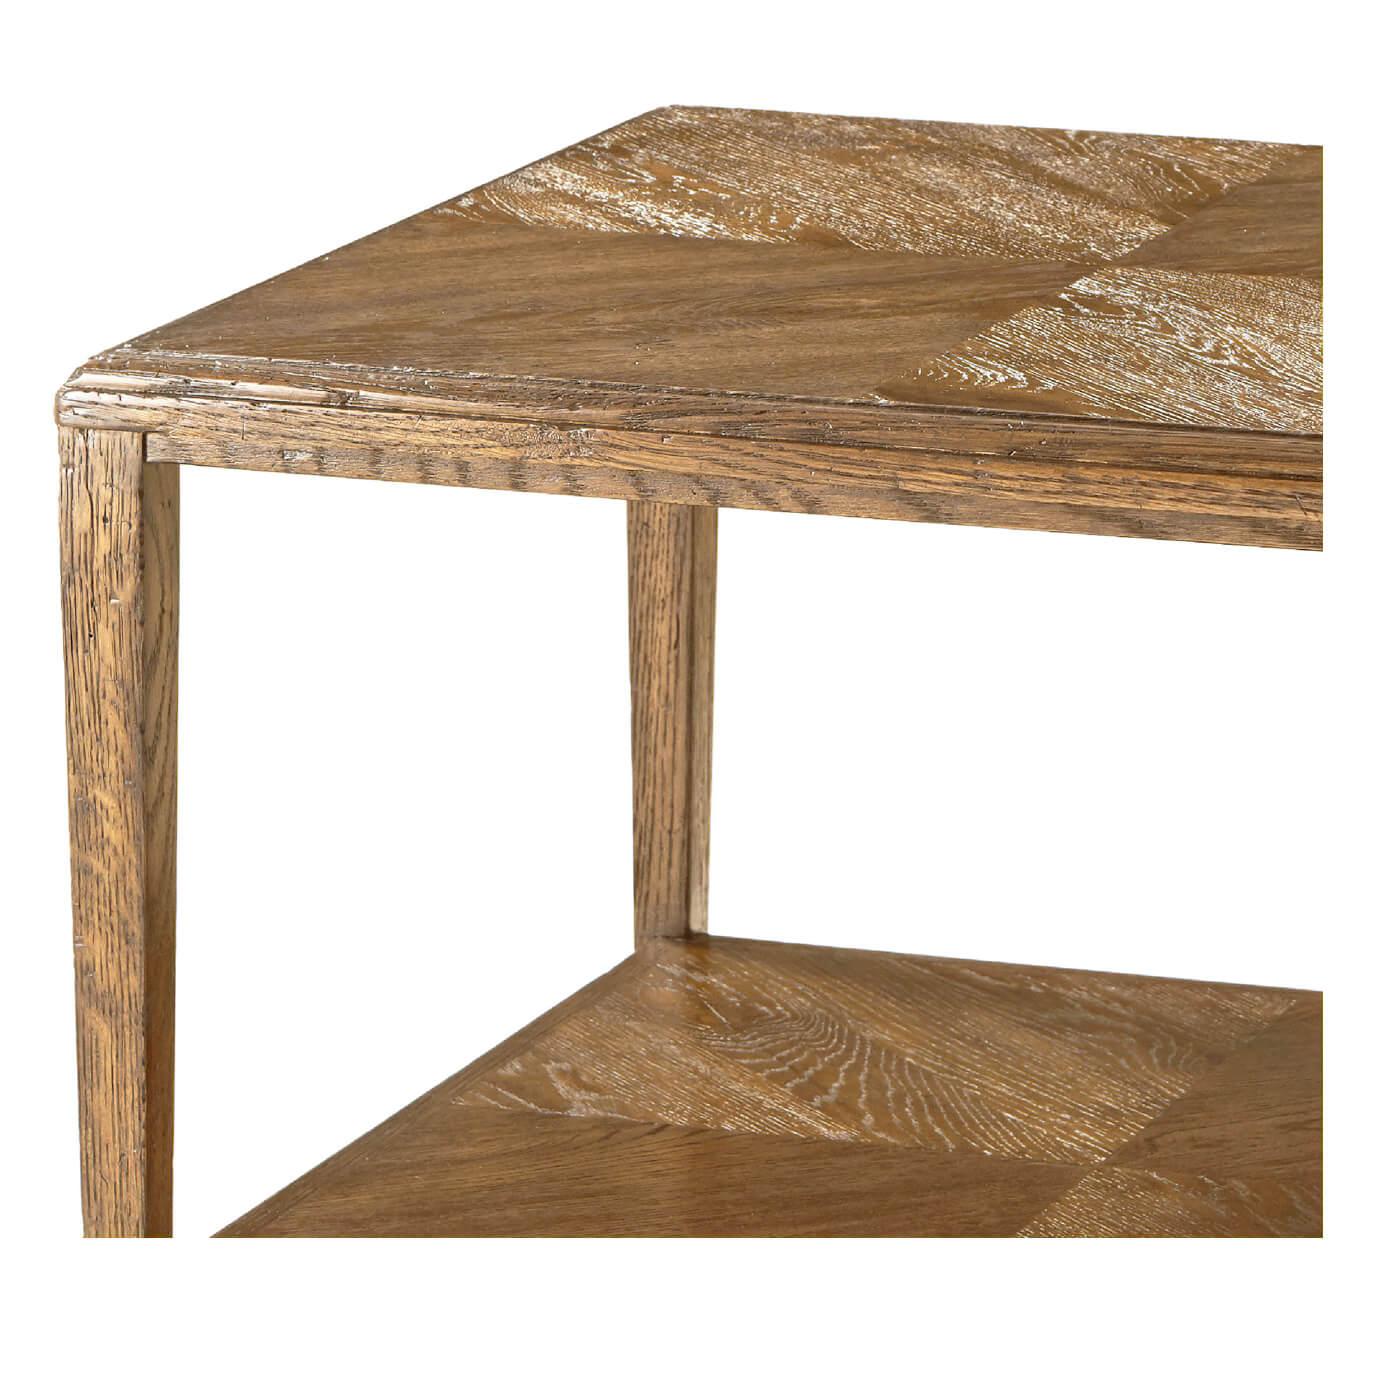 An oak parquetry rustic end table with parquetry patterned top and bottom tier with square tapered legs. 
Shown in dawn finish.
Dimensions: 24